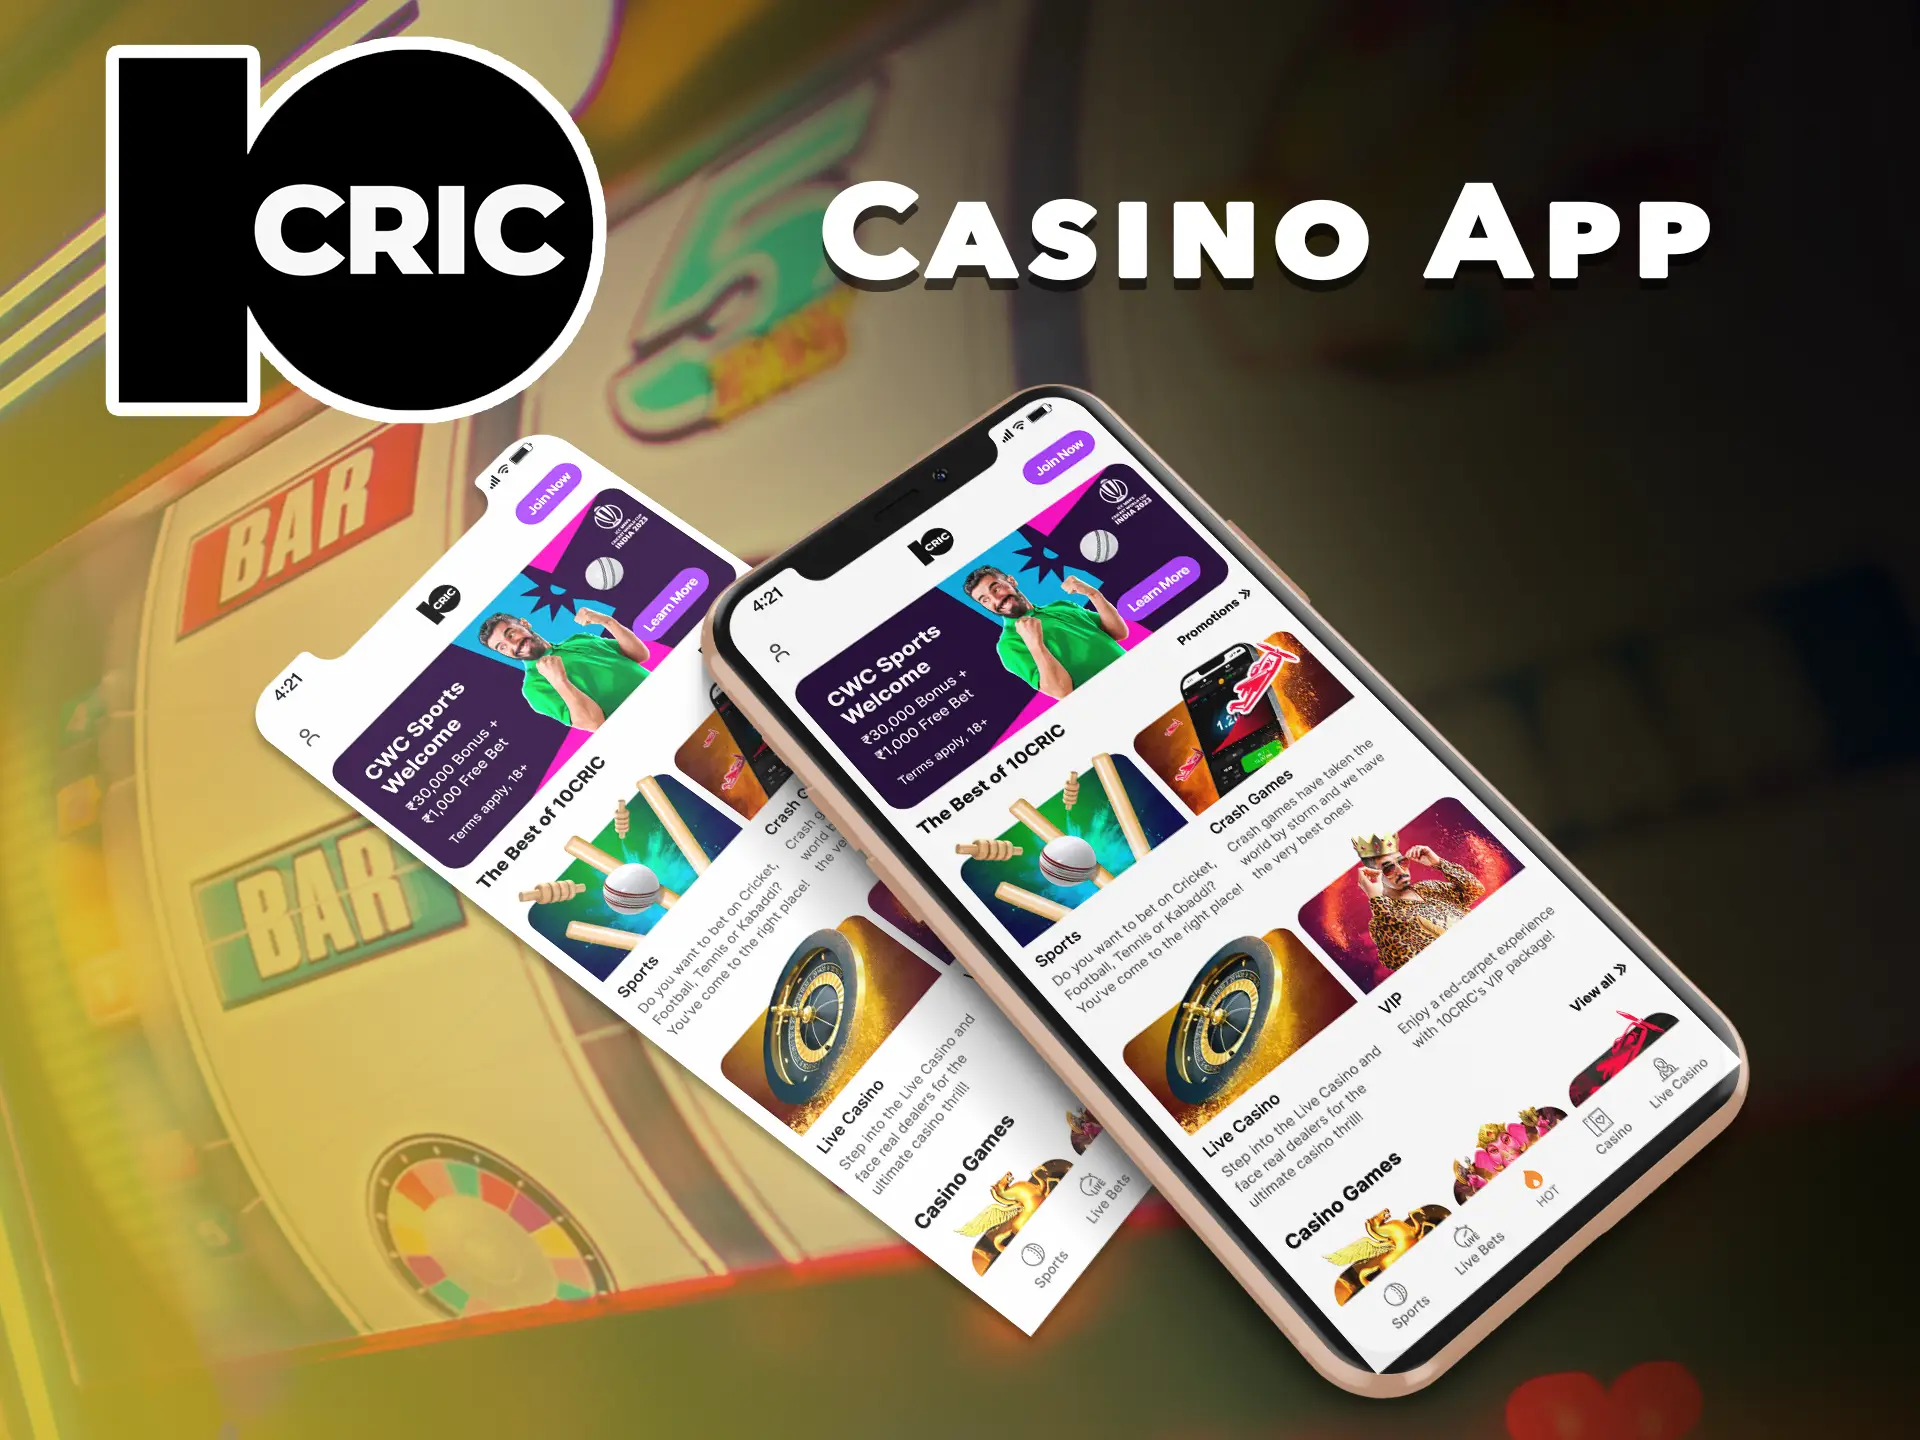 You will be surprised by the new mobile software for playing 10Cric casino games anywhere you want.